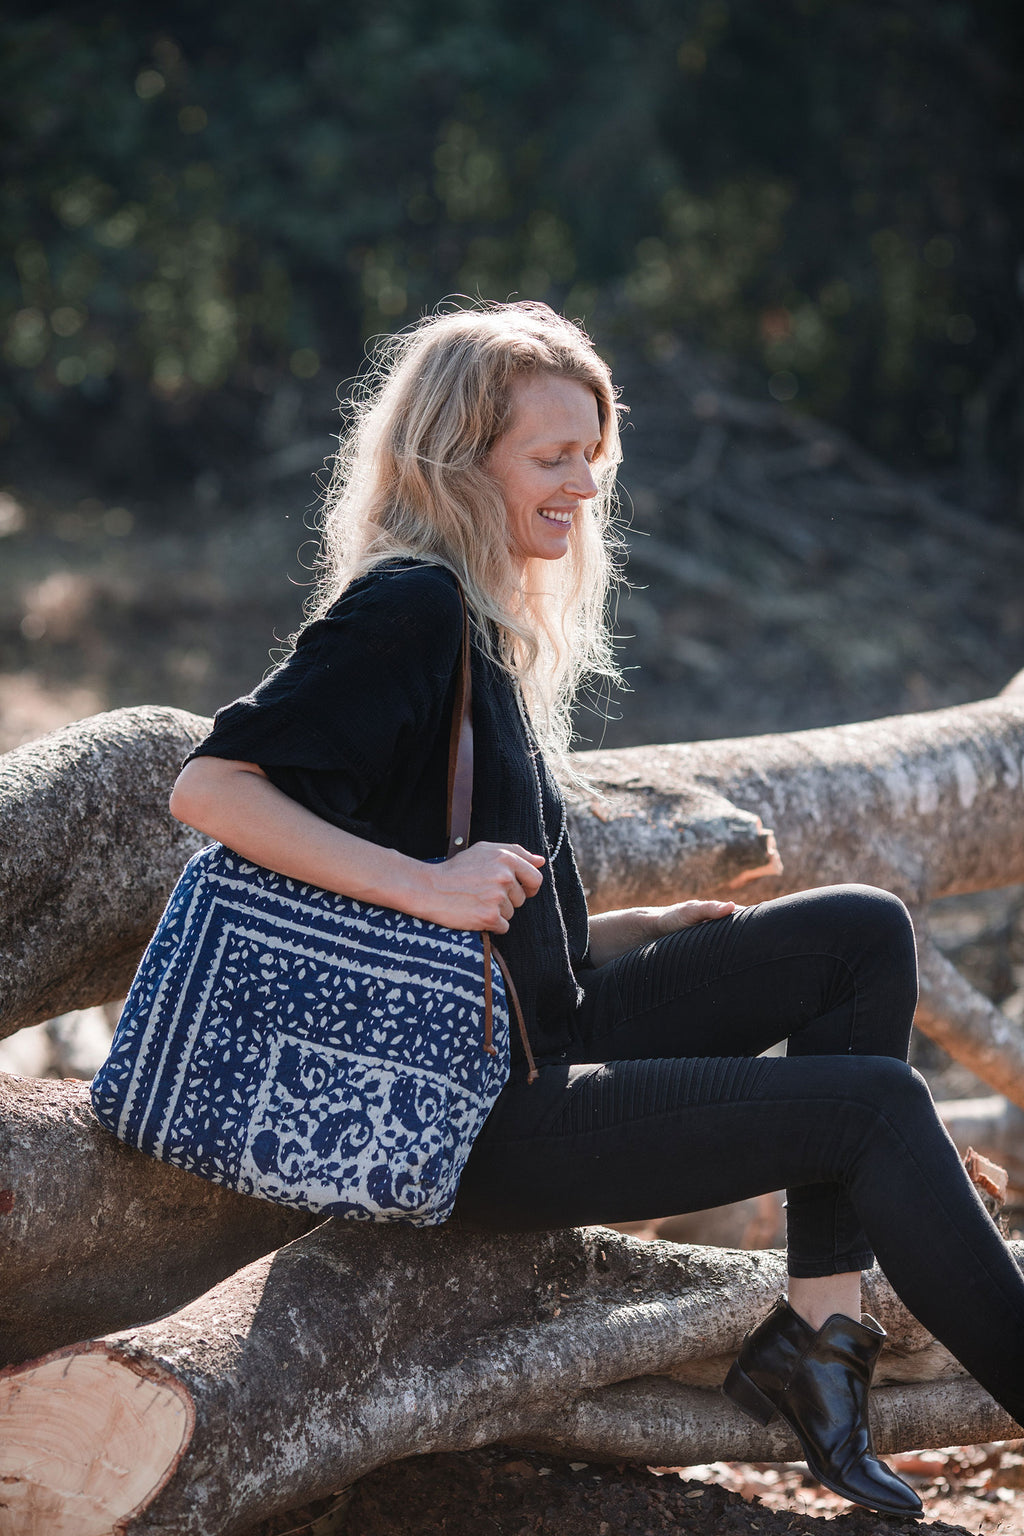 Indigo Blue and Off-White Shoulder Bag from Block Print Fabric